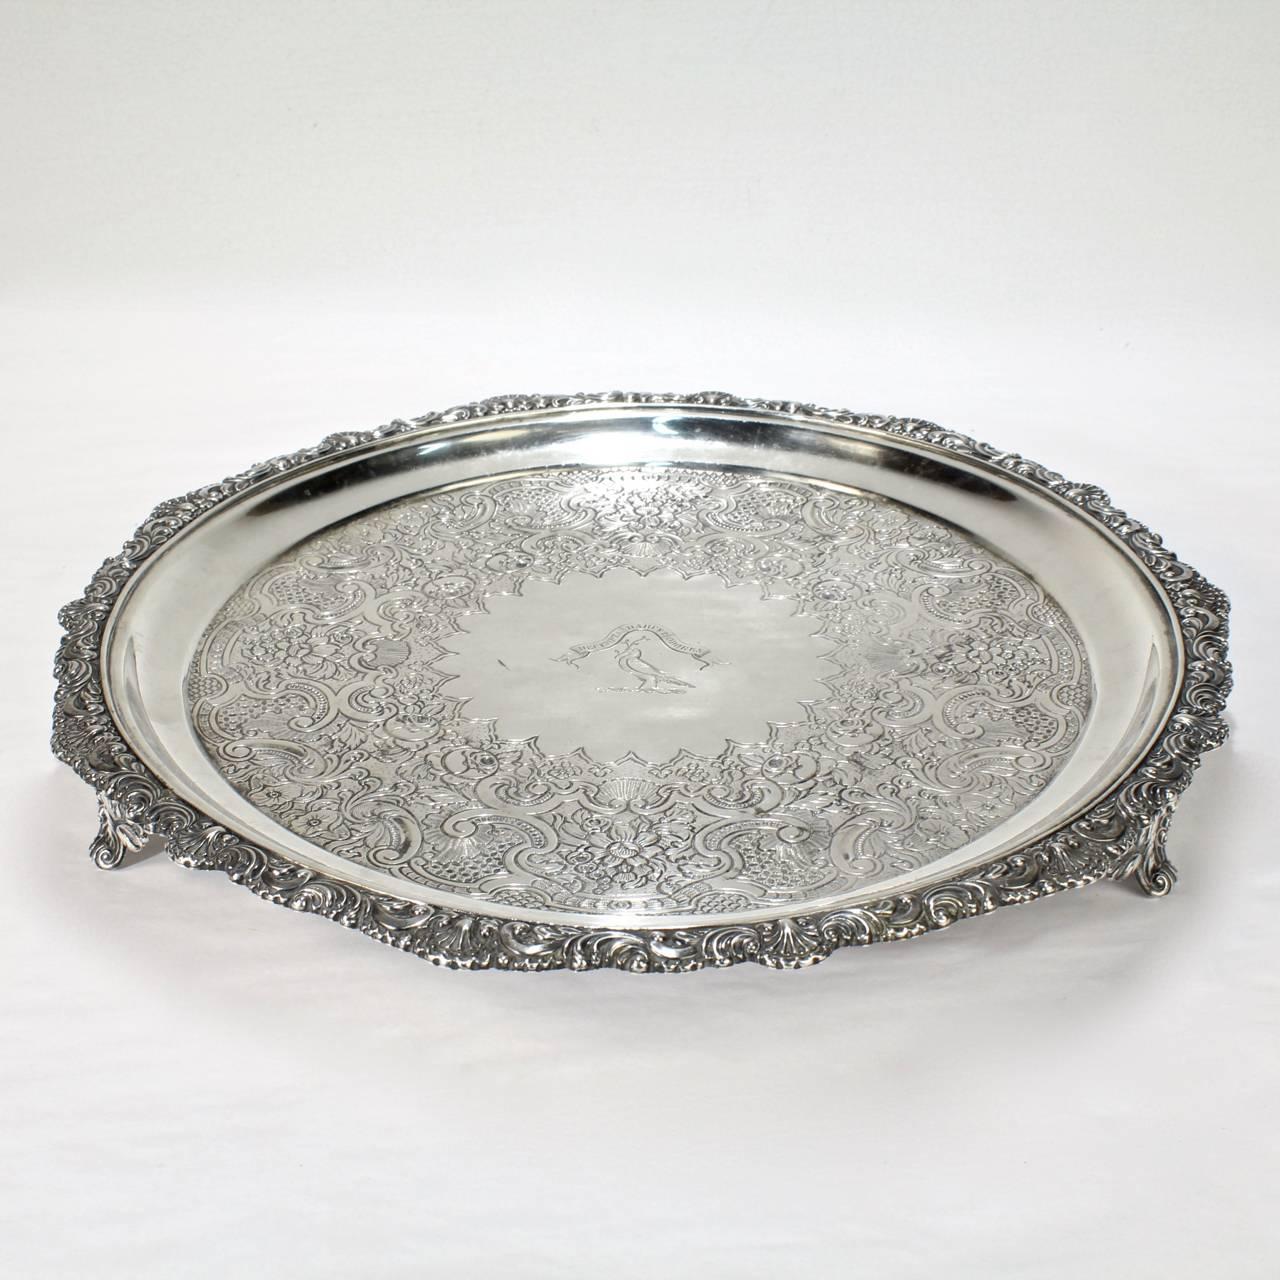 A good, heavy Scottish Regency period sterling silver salver with scalloped edge, floral decoration, and engraved crest and motto.

Made by George McHattie in Edinburgh in 1824.

With an engraved family crest for the Hunter-Marshall family of